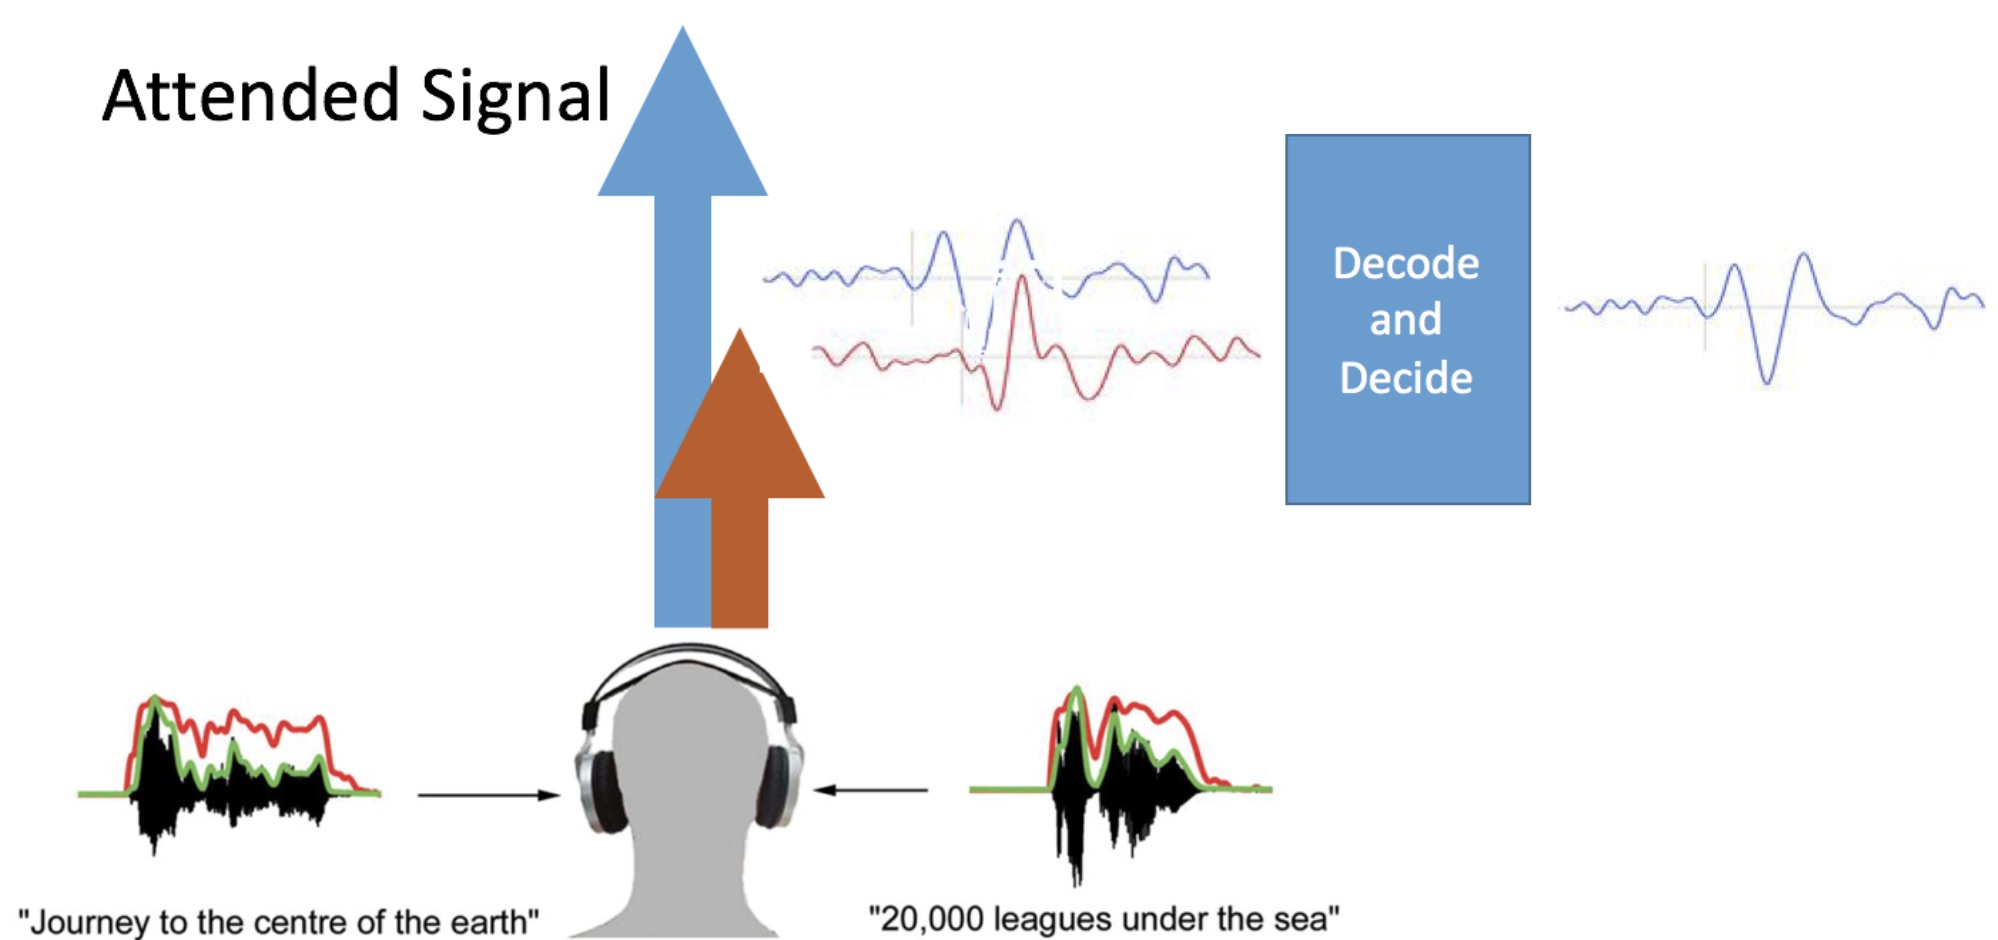 Auditory attention decoding